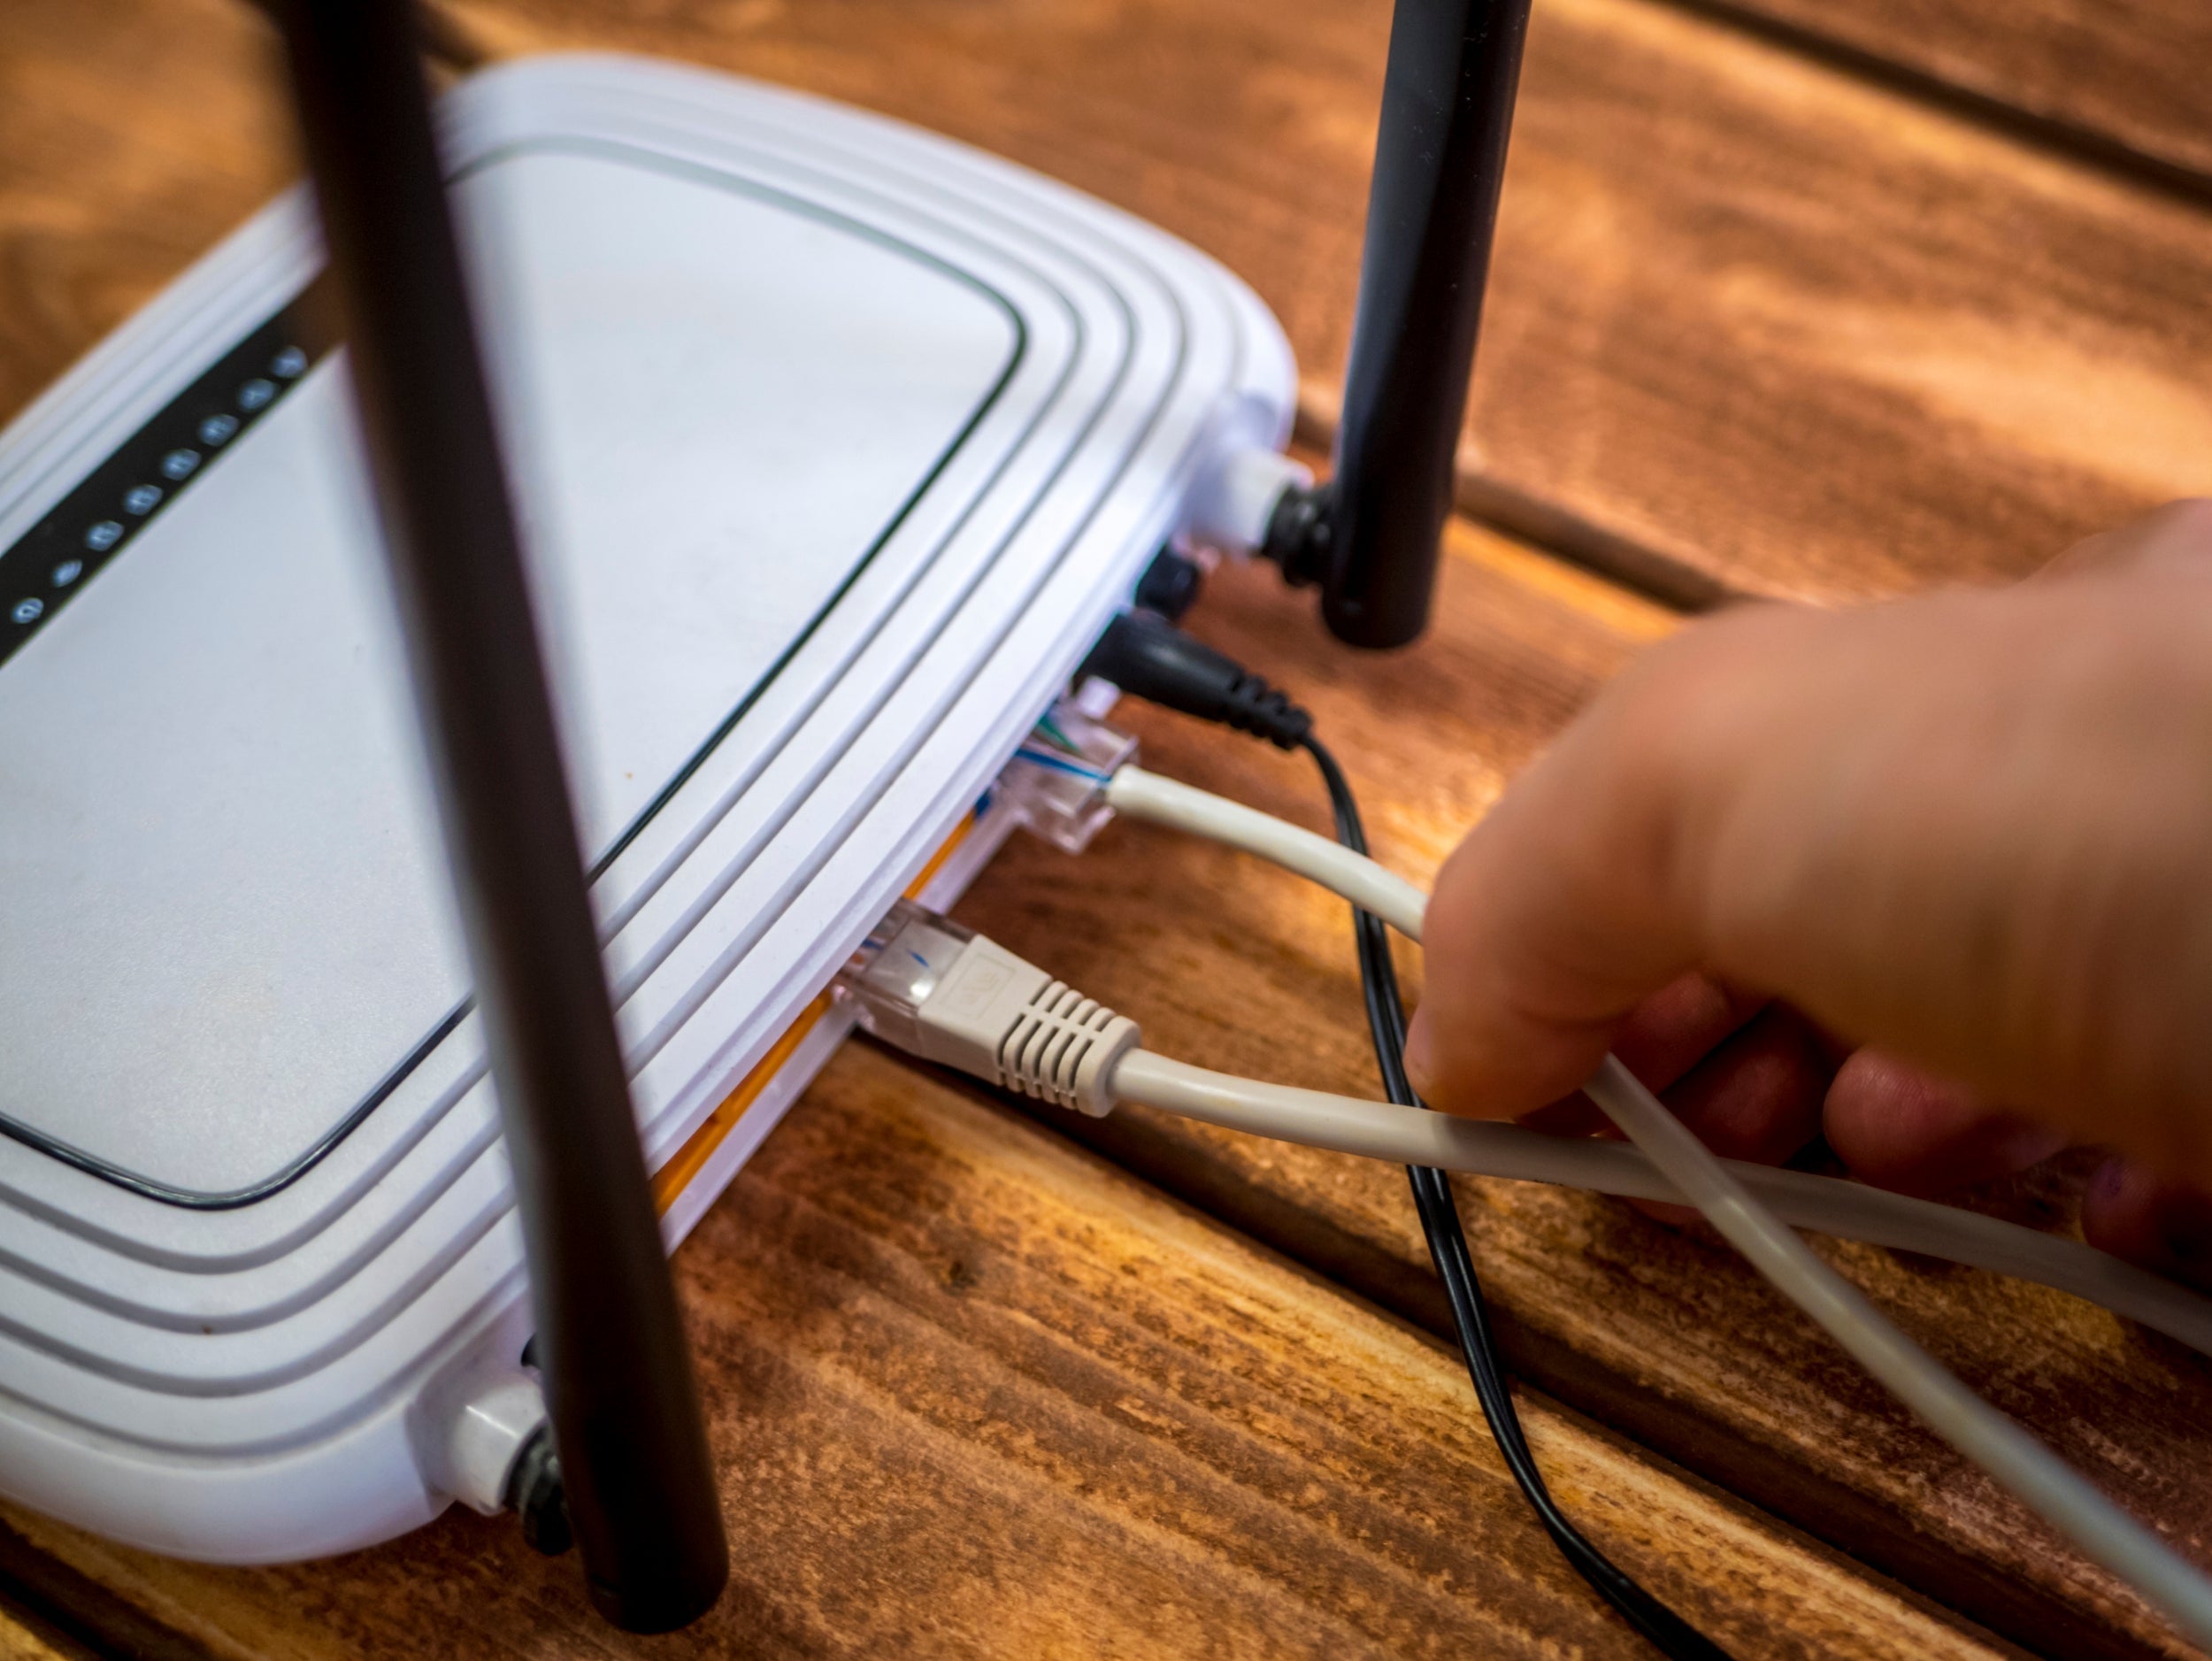 You can often fix jumping vinyl by giving it a judicious clean or changing the stylus, but a malfunctioning broadband service is a mite harder to deal with